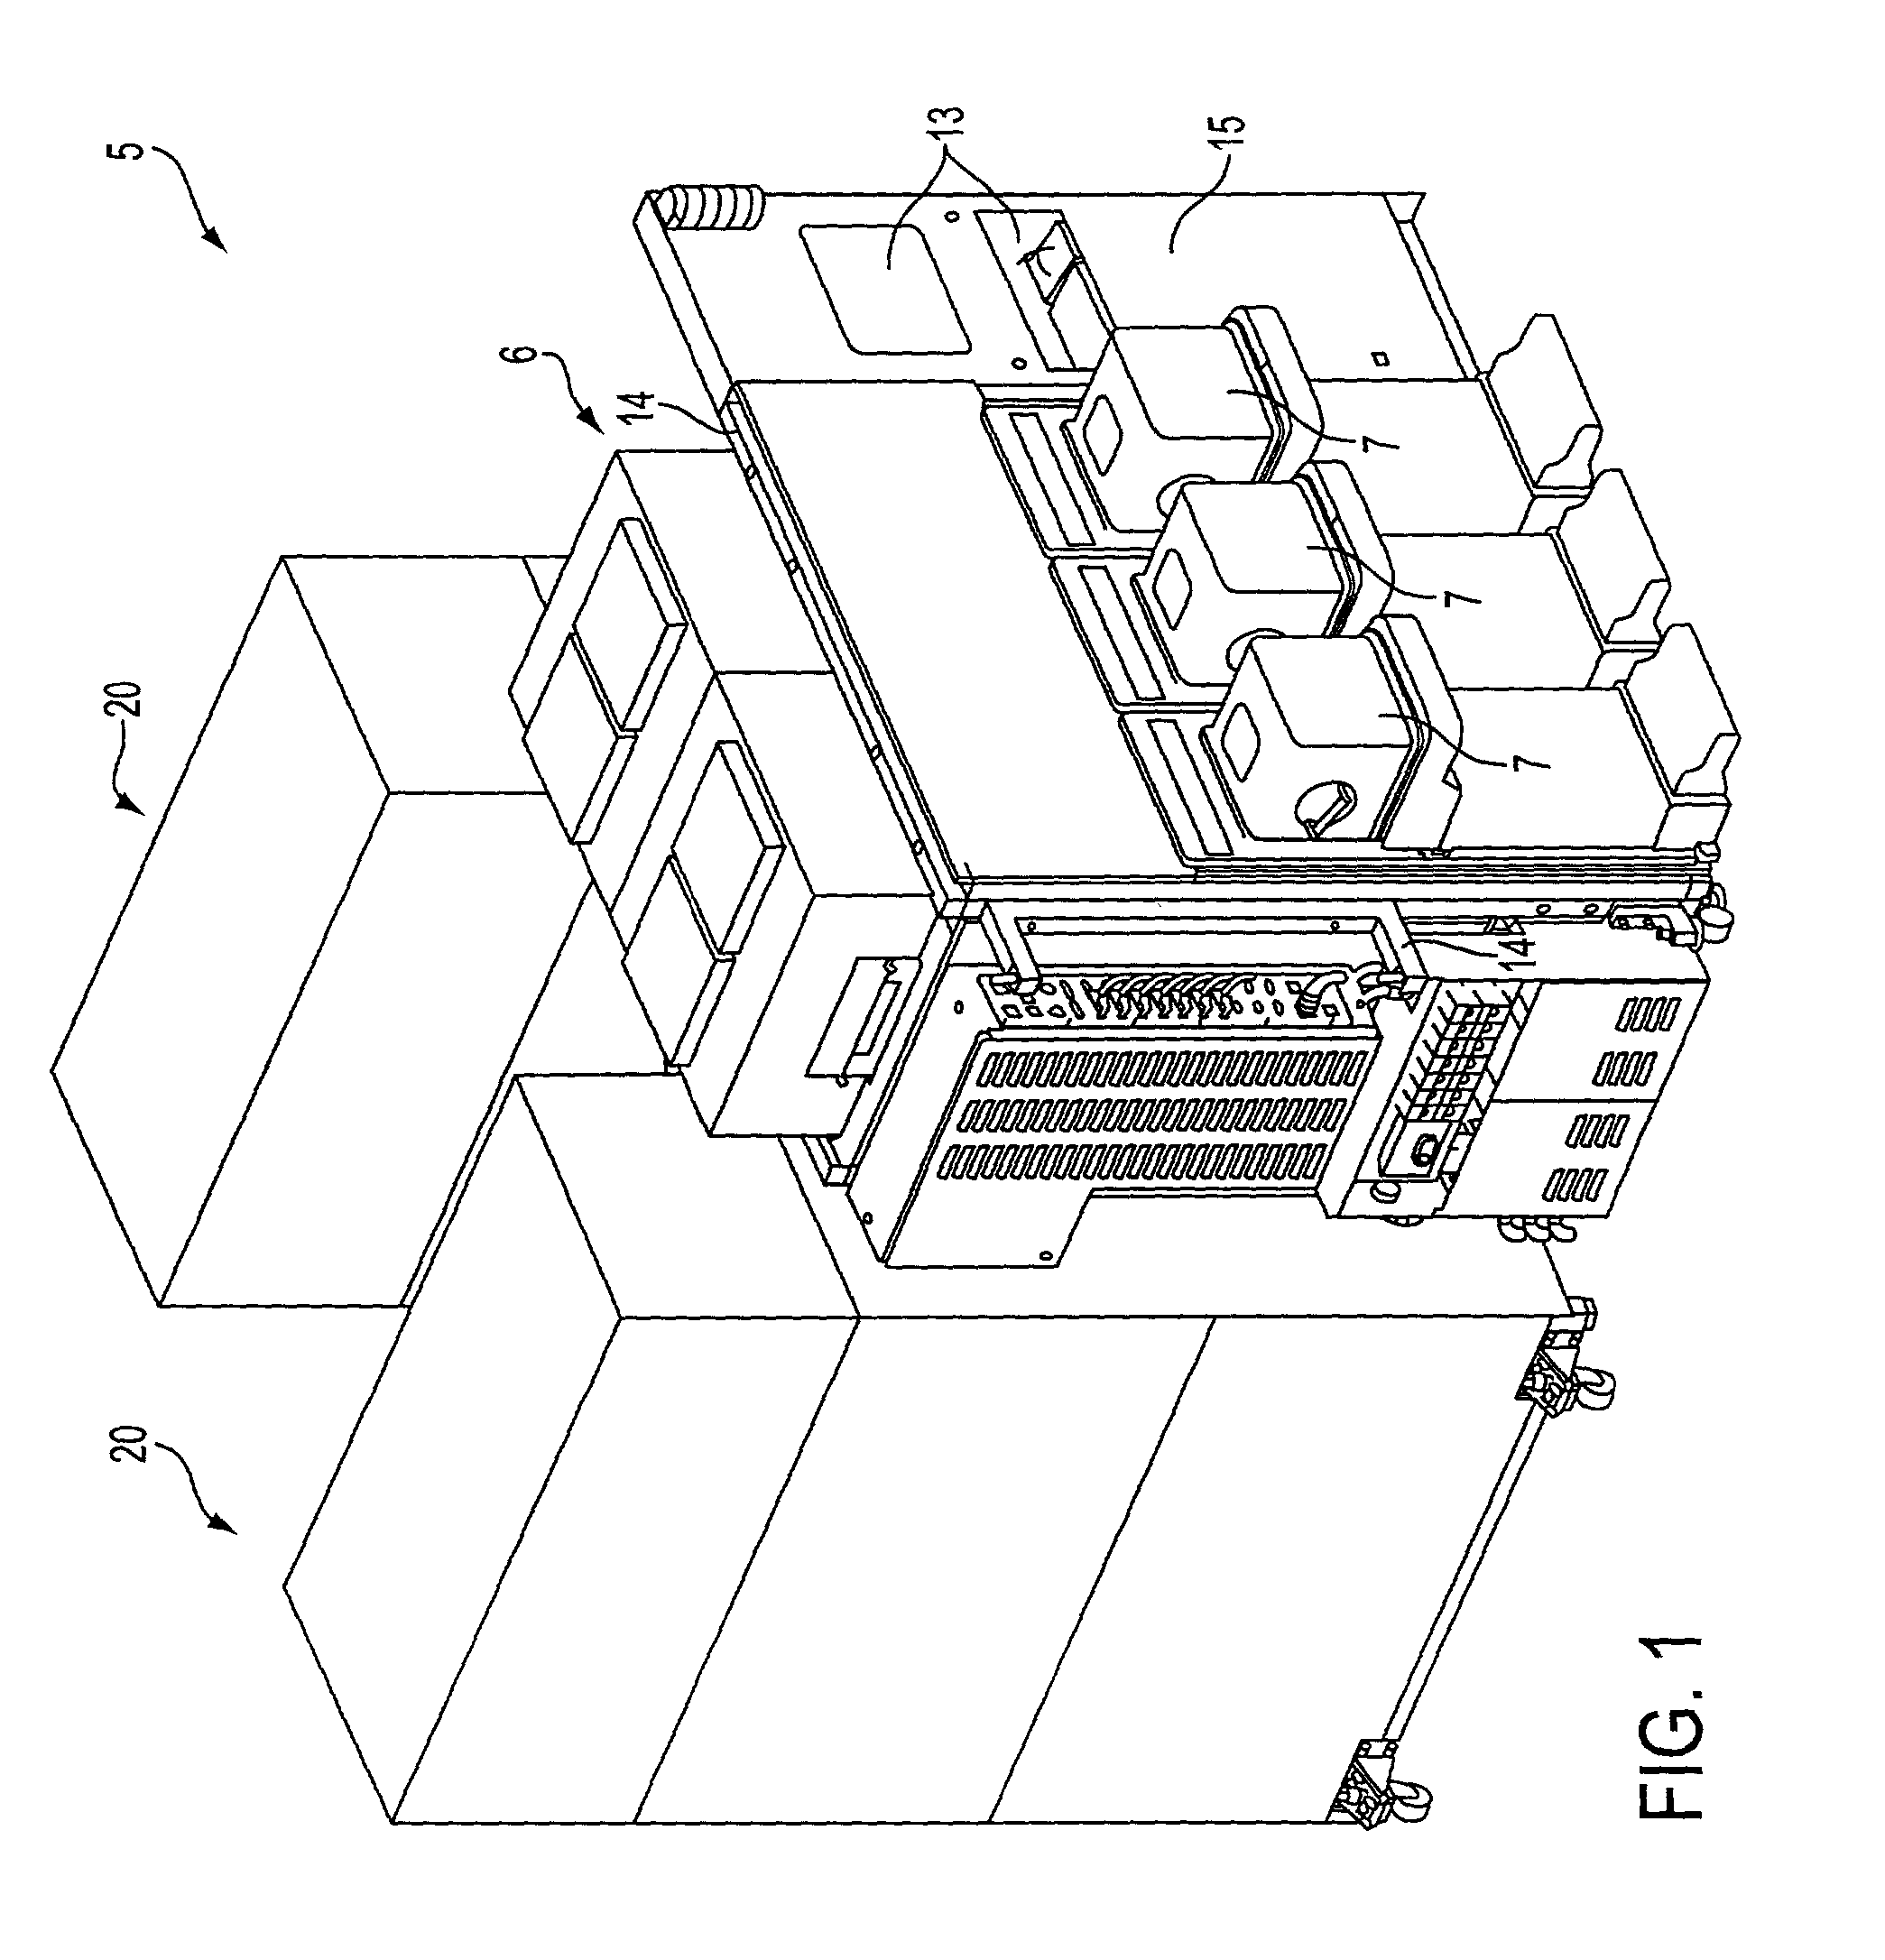 Semiconductor wafer processing system with vertically-stacked process chambers and single-axis dual-wafer transfer system